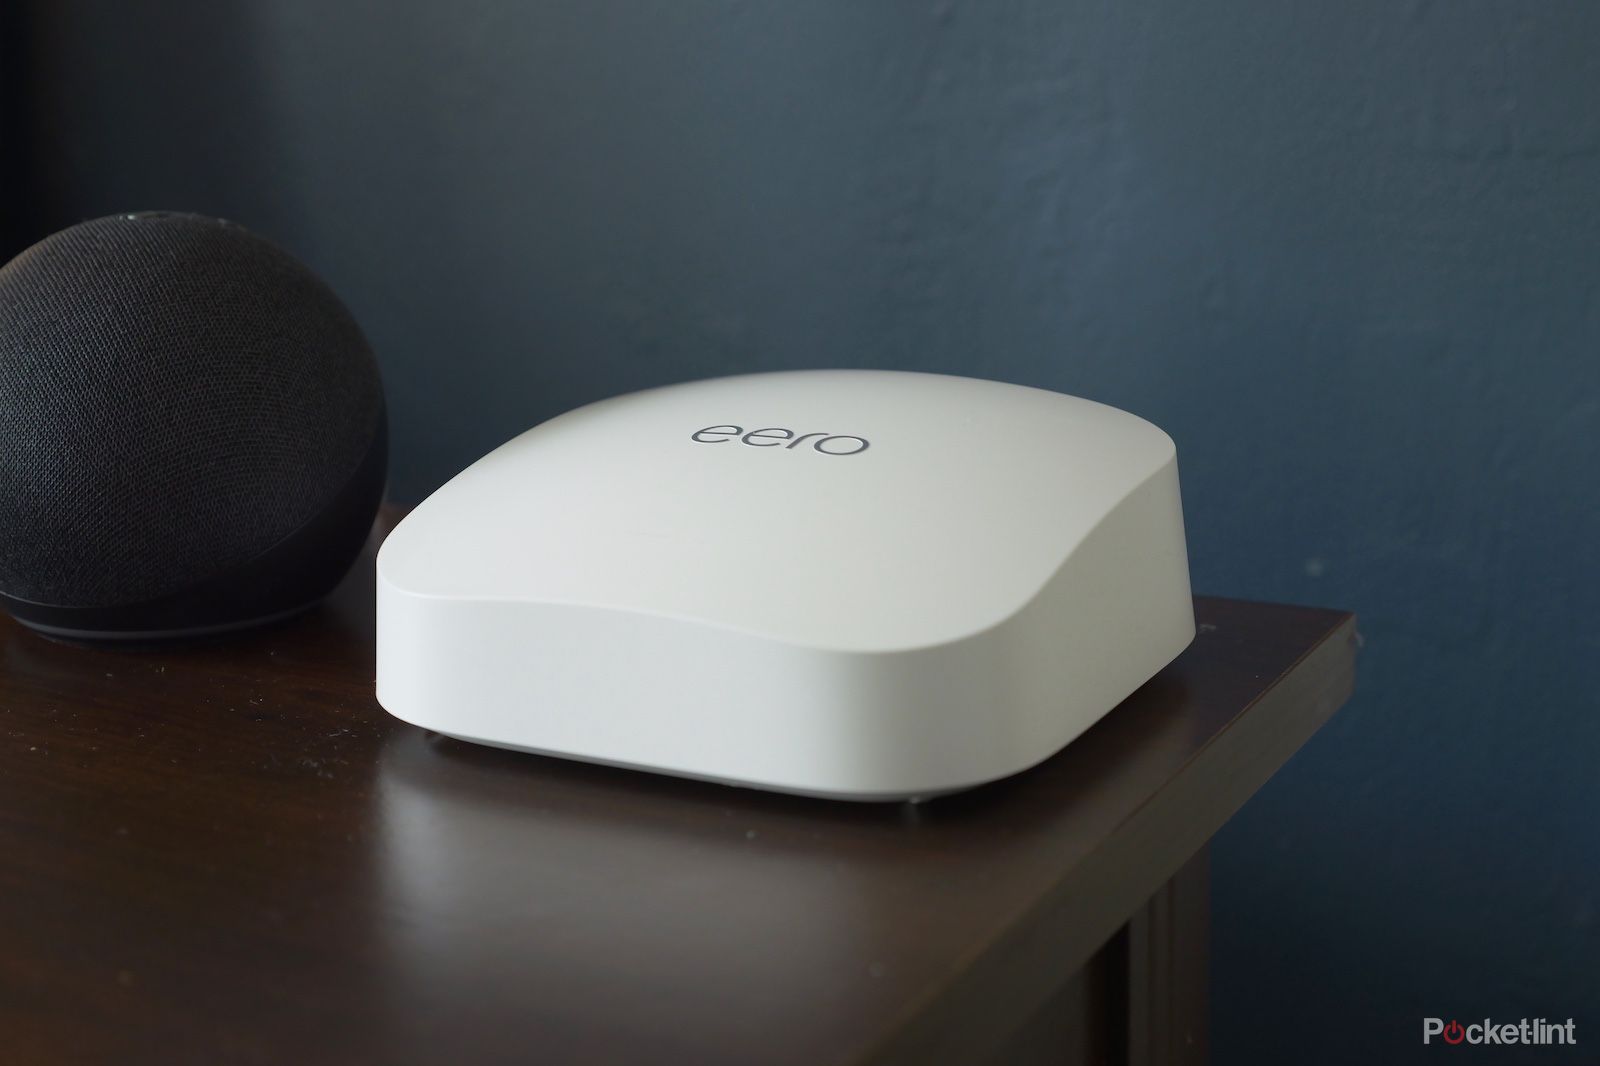 Eero Pro 6E Review - Reviewed